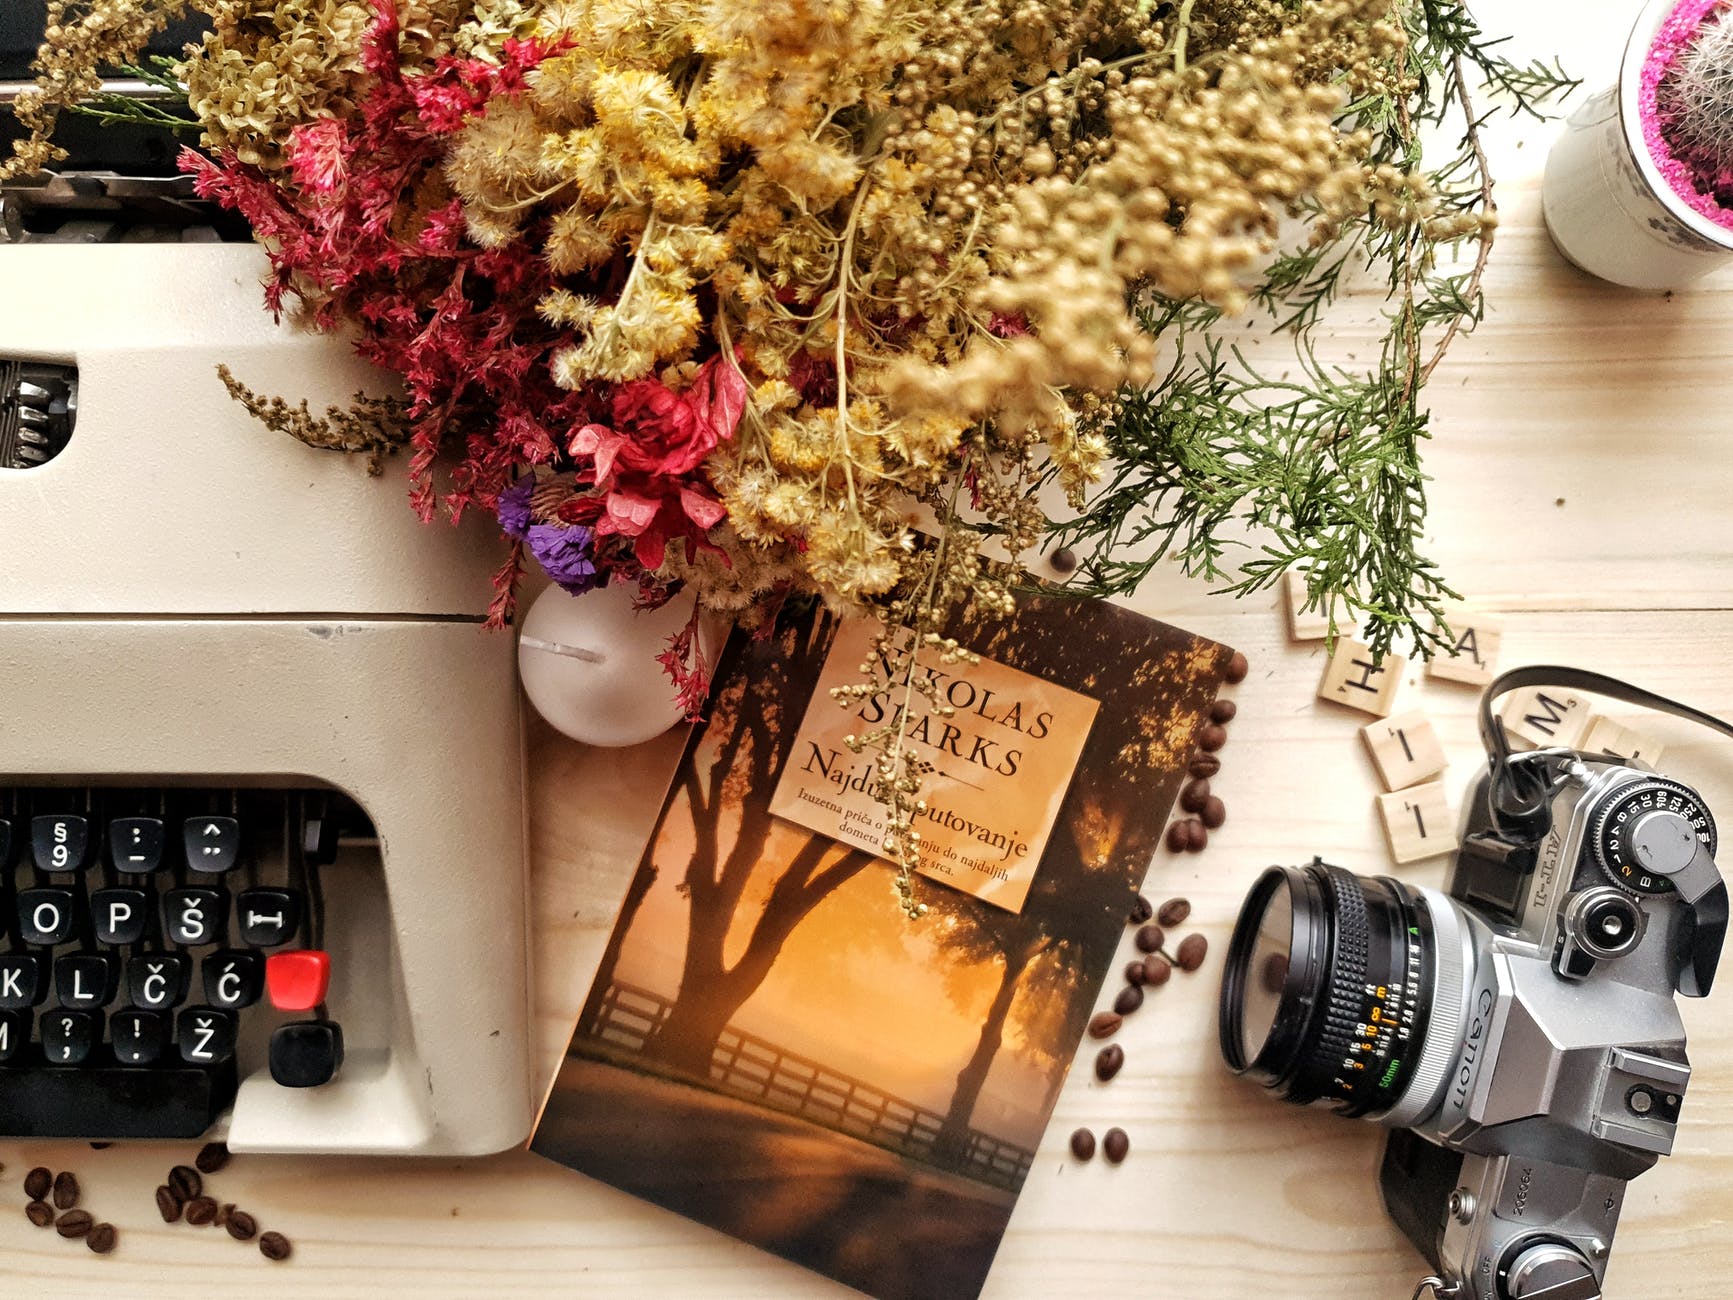 bunch of flowers and book arranged on wooden table with vintage typewriter and camera